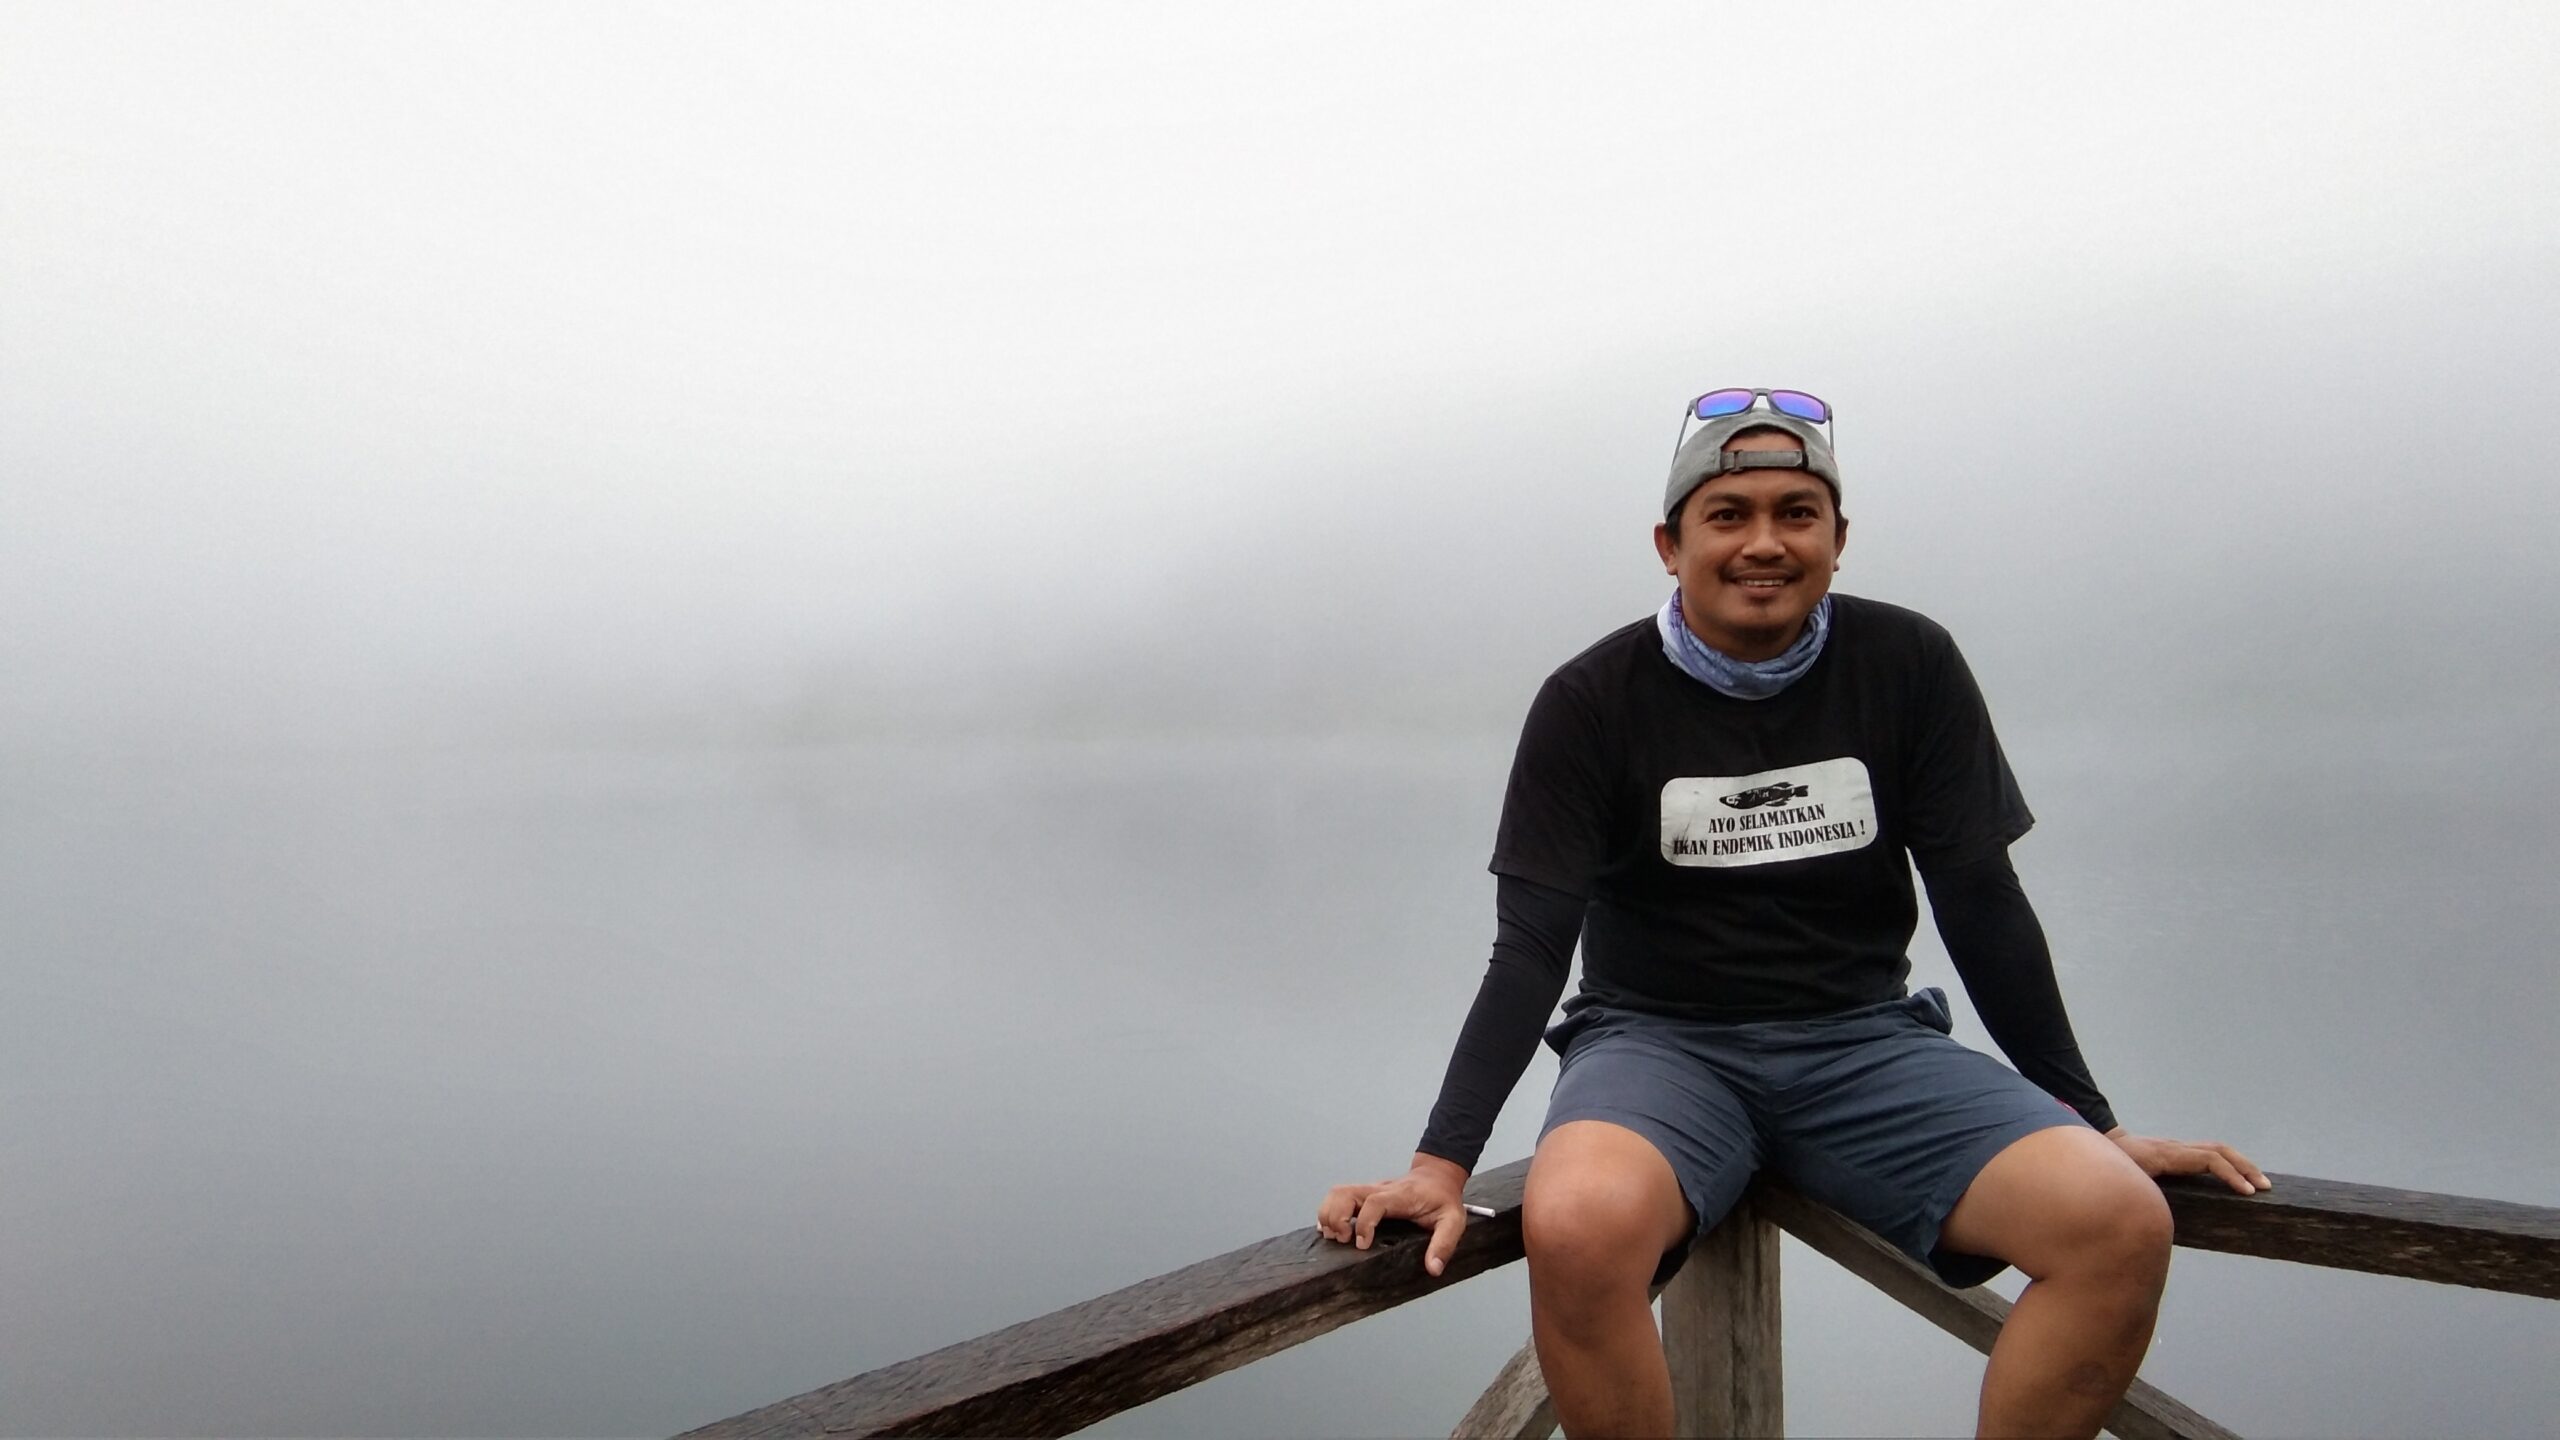 A photograph of Abdul Gani in athletic clothes sitting on a fence in front of a misty view.